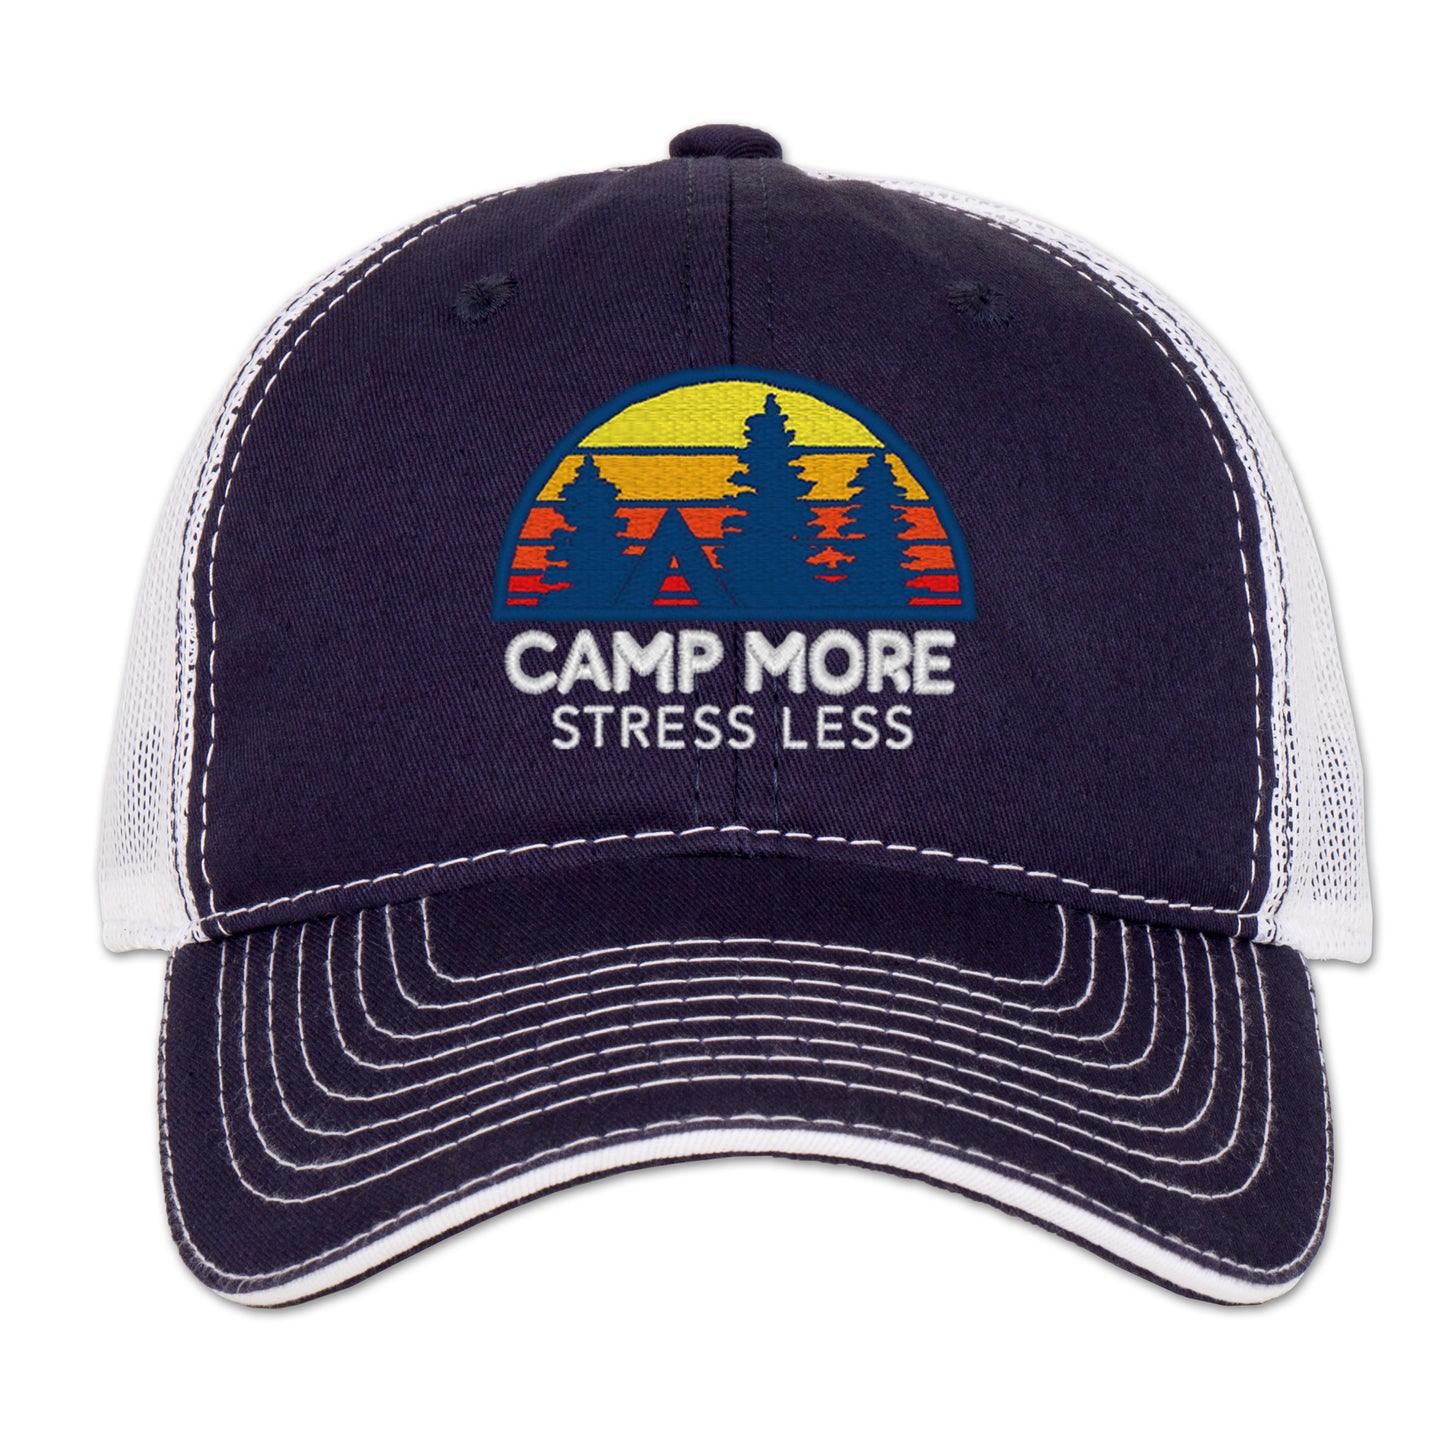 Camp More Stress Less Trucker Hat